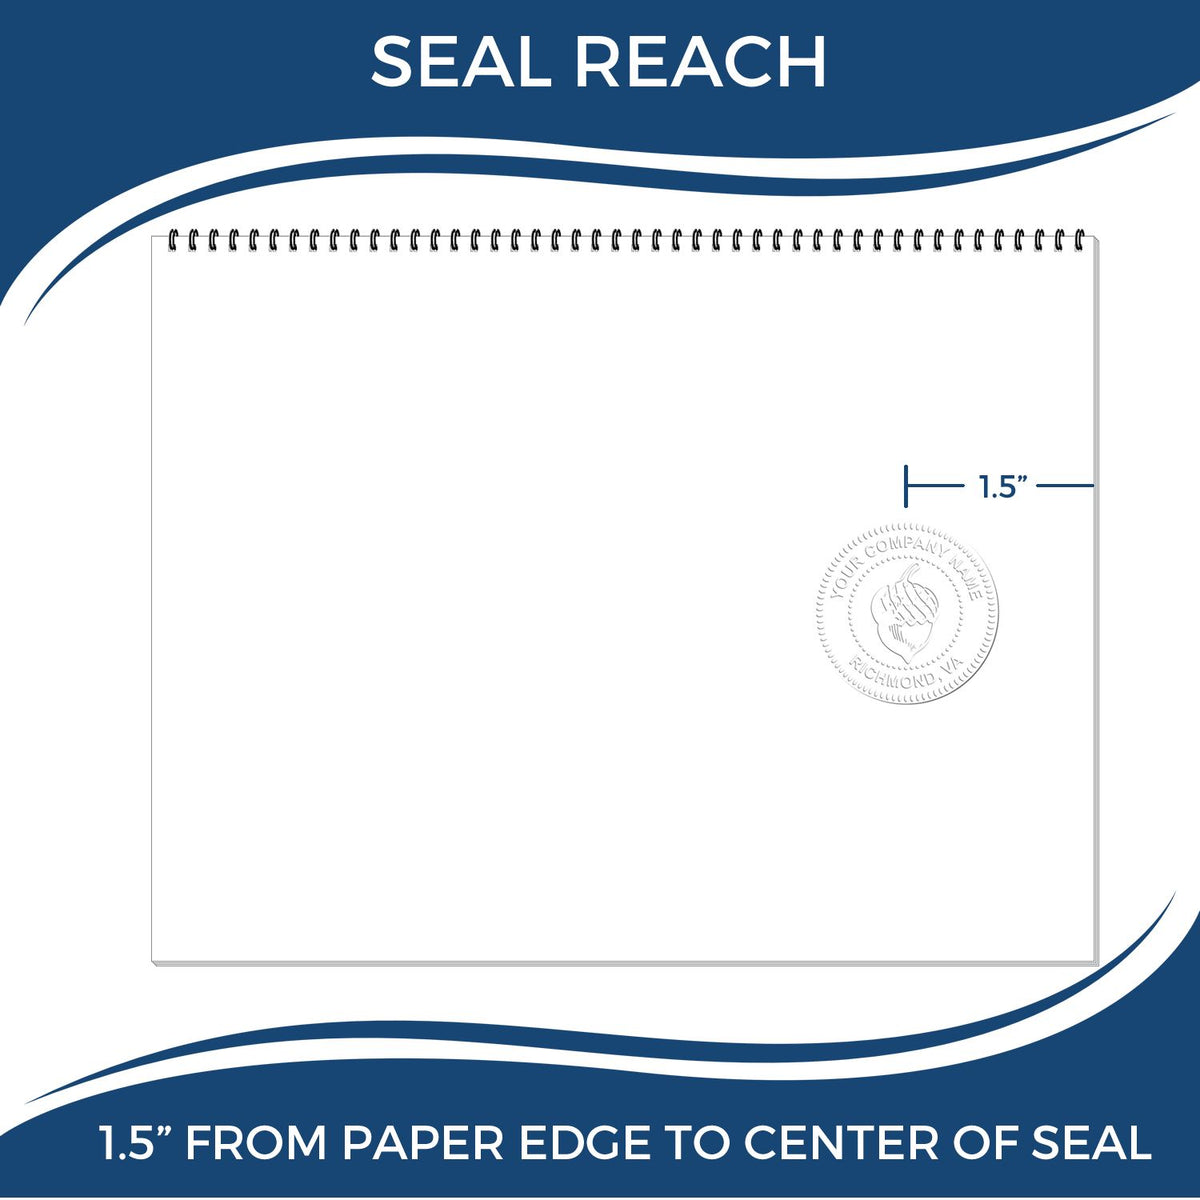 An infographic showing the seal reach which is represented by a ruler and a miniature seal image of the Missouri Desk Surveyor Seal Embosser